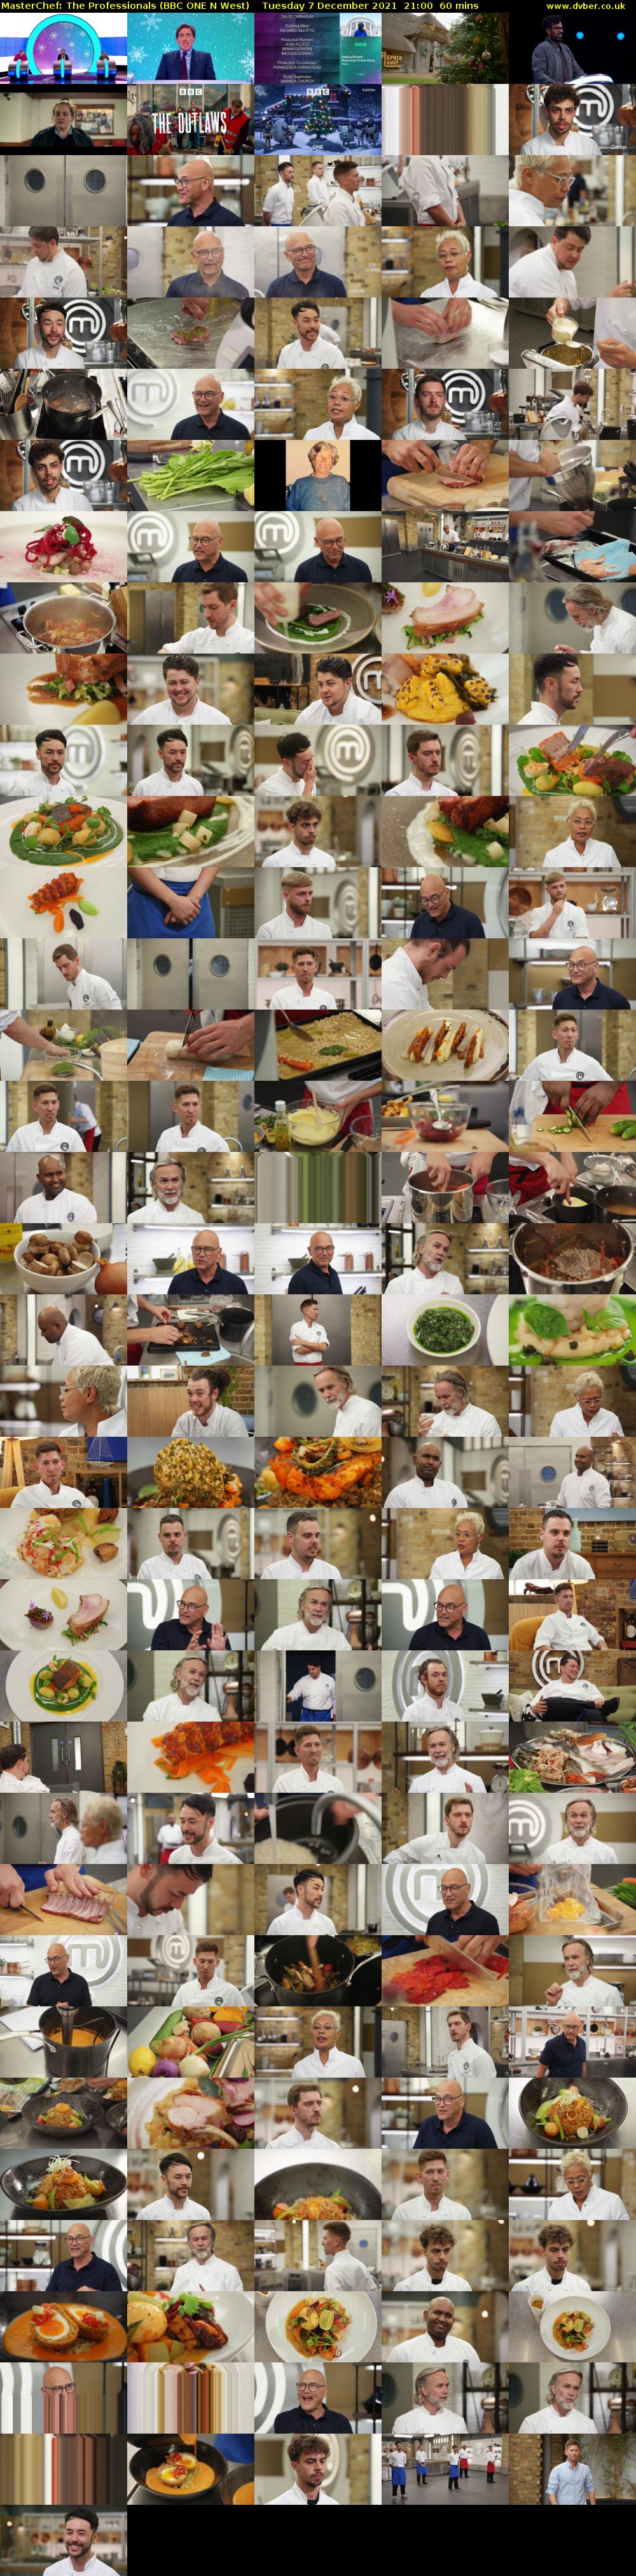 MasterChef: The Professionals (BBC ONE N West) Tuesday 7 December 2021 21:00 - 22:00